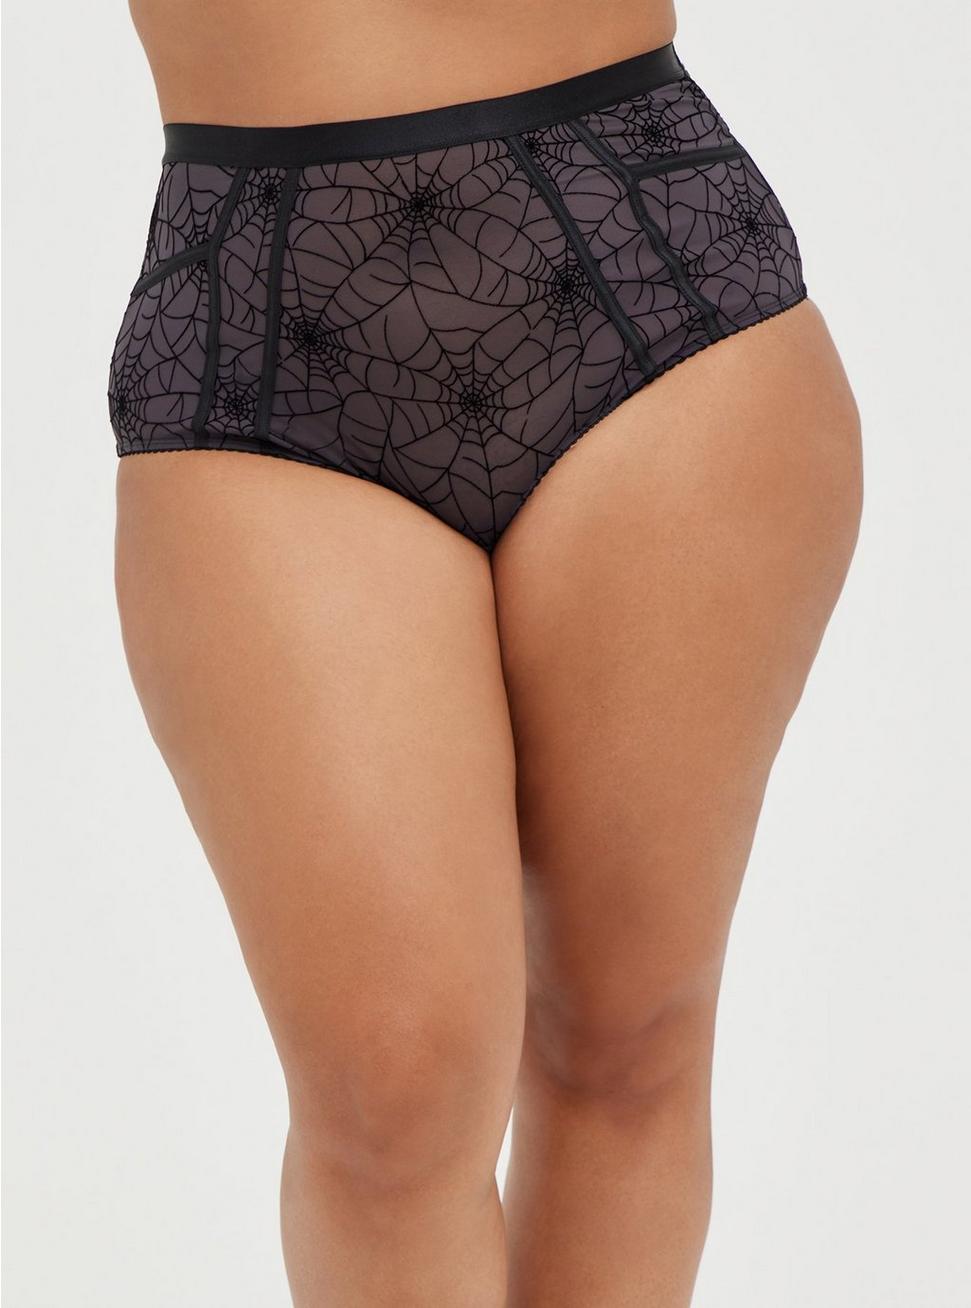 Flocked Mesh High Waist Brief Panty, CAUGHT IN A WEB, hi-res